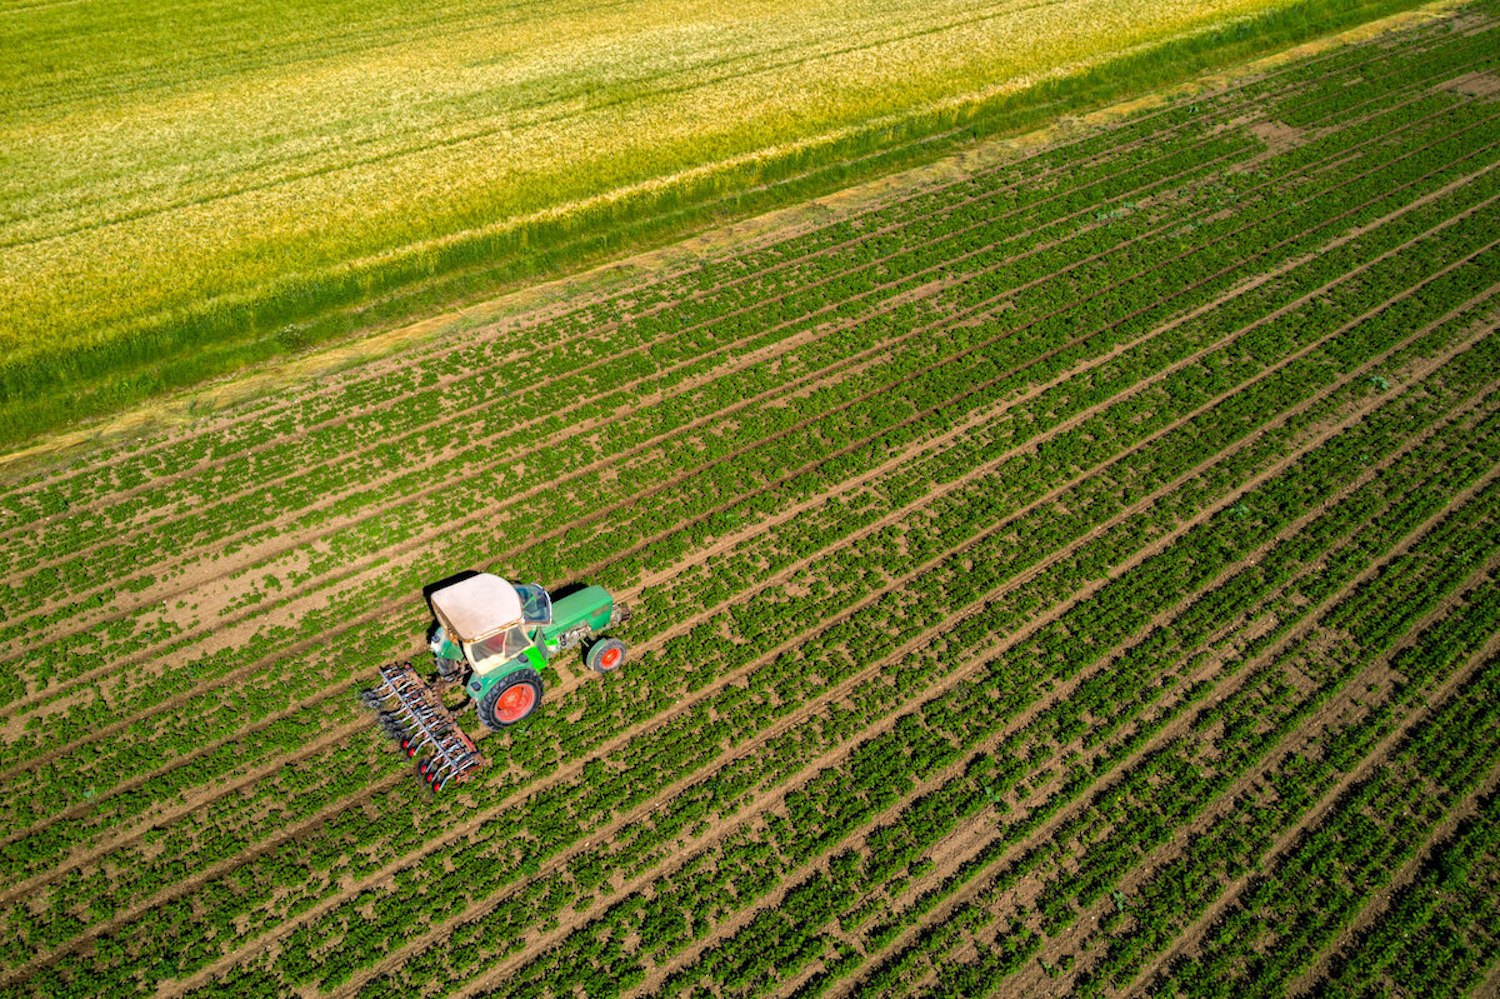 Aerial shot of a tractor over farmland. July 2021